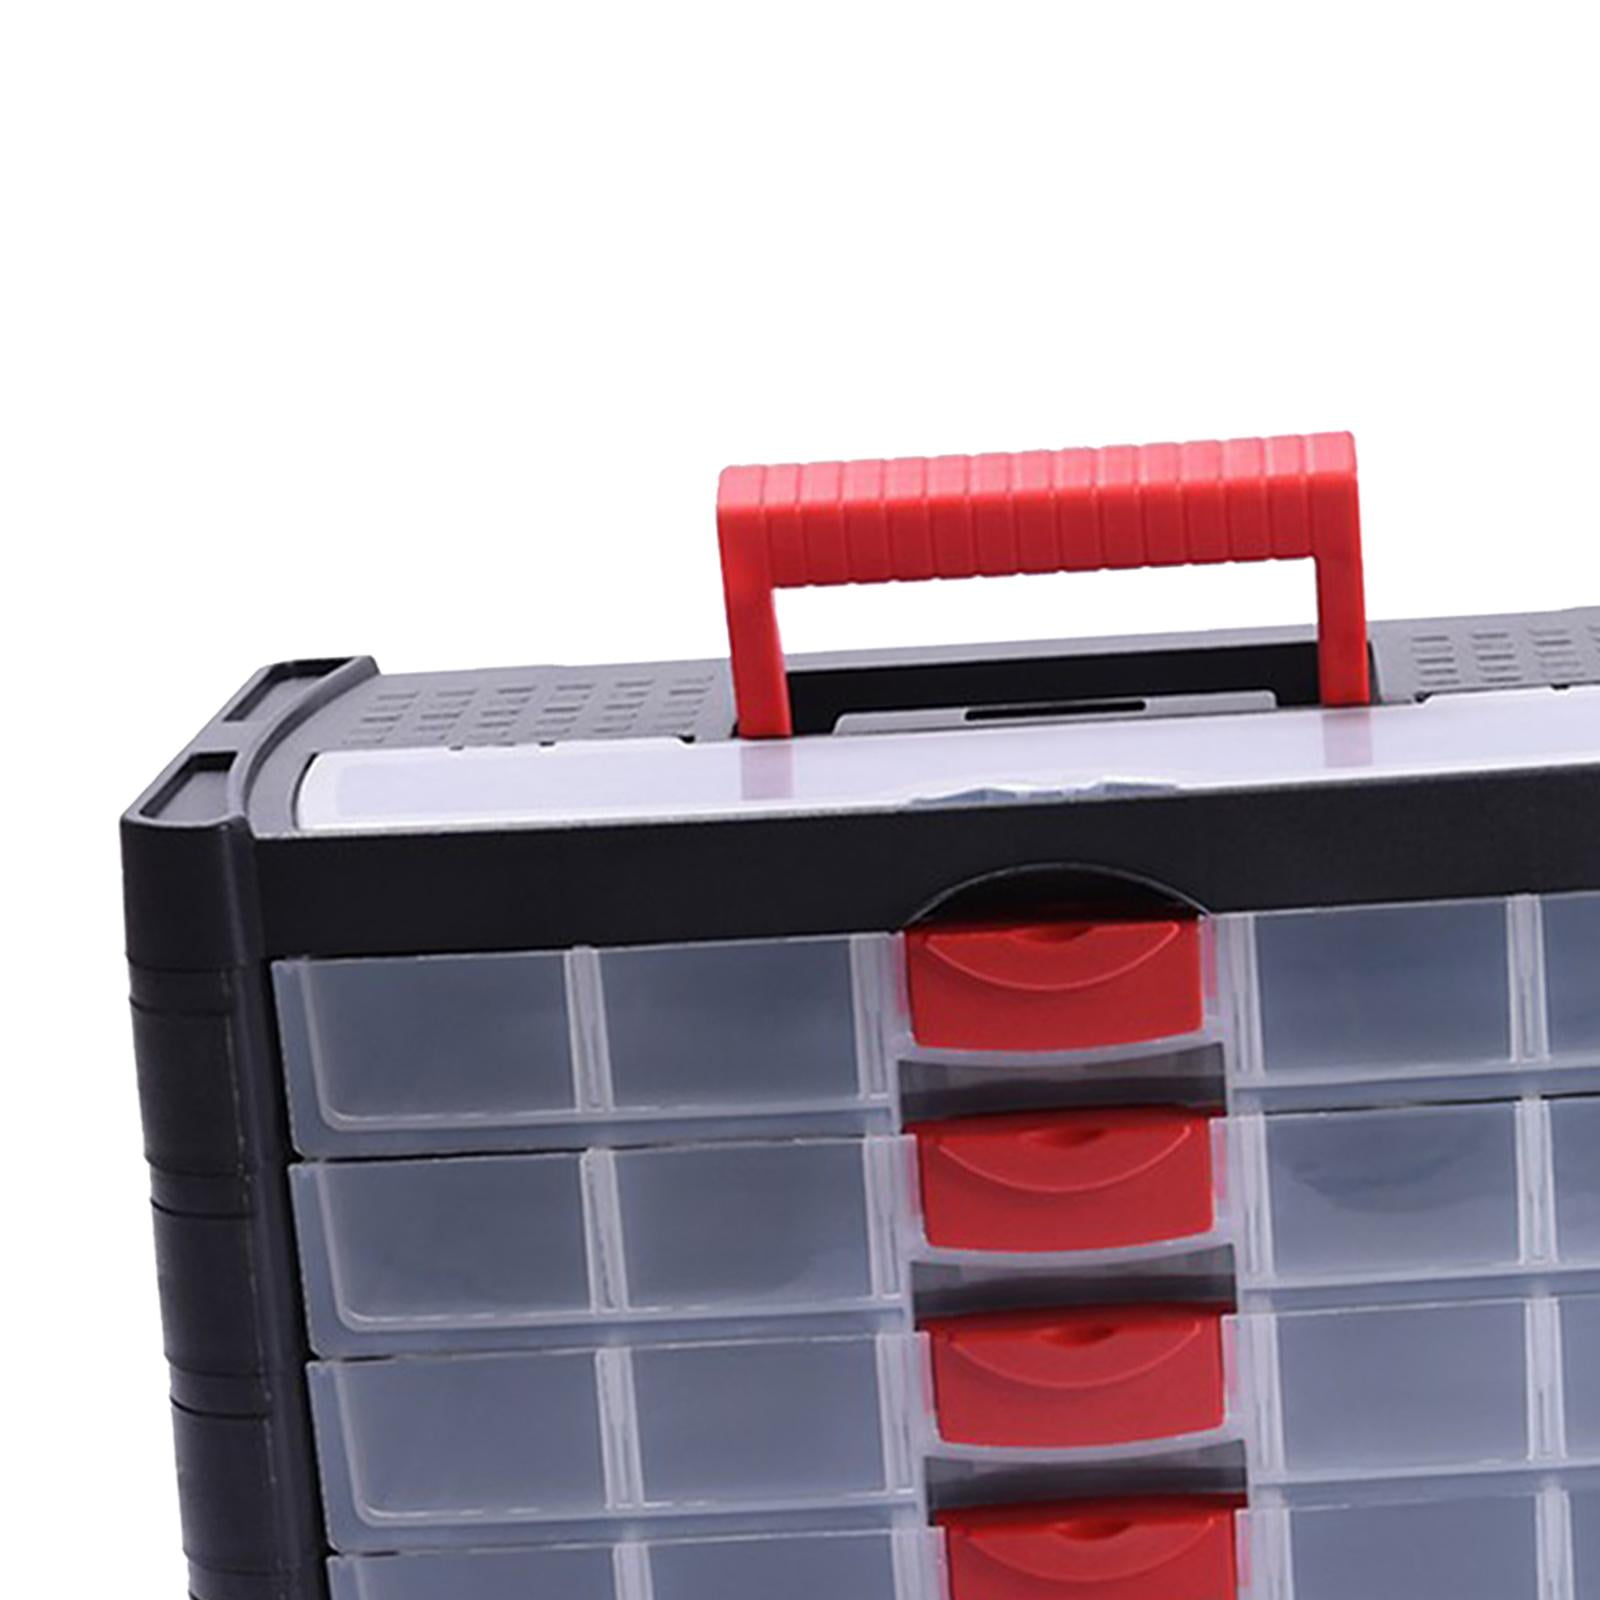 Gator Clamps Toolbox Organizer - Tool Organizer Nail Organizers - Parts  Case Storage Box - Screw Nuts and Bolt Electronic Component Storage